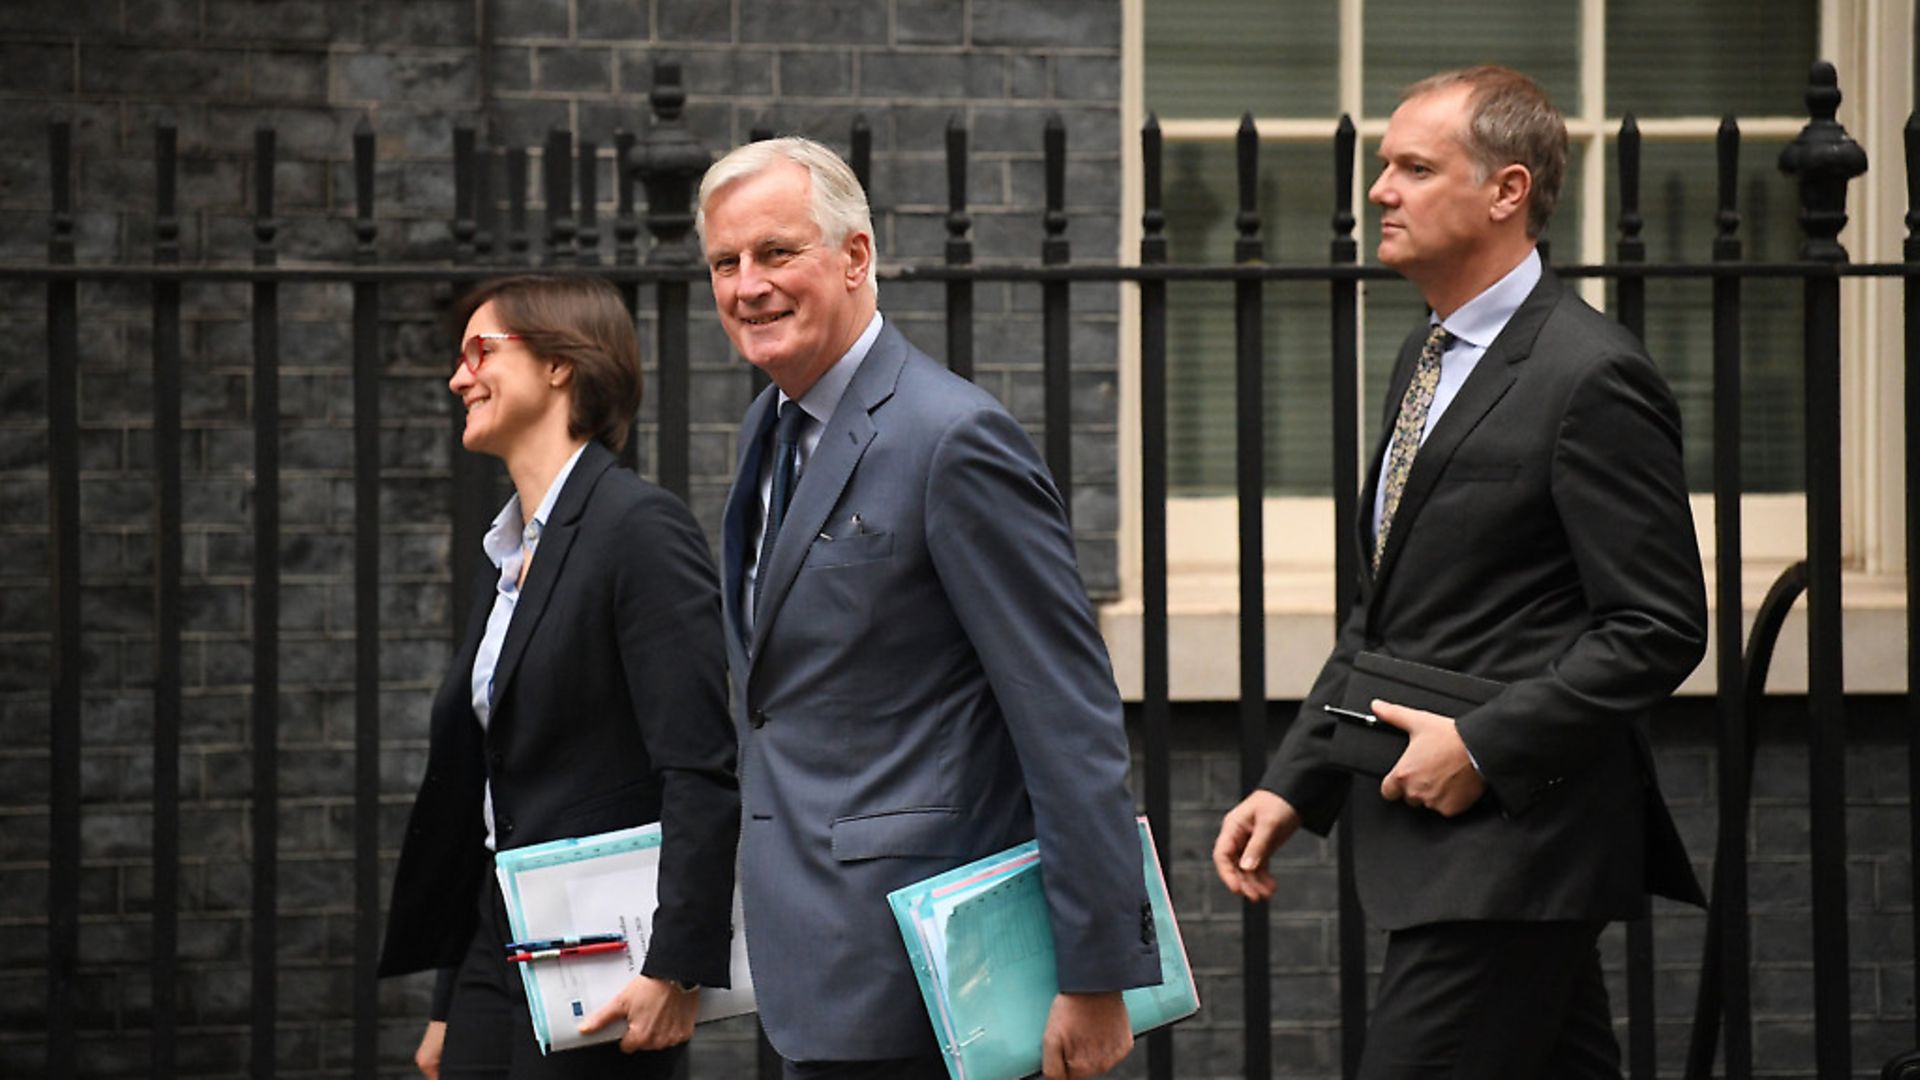 EU Chief Brexit Negotiator, Michel Barnier (centre) in Downing Street ahead of a meeting with Boris Johnson. Photograph: Stefan Rousseau/PA. - Credit: PA